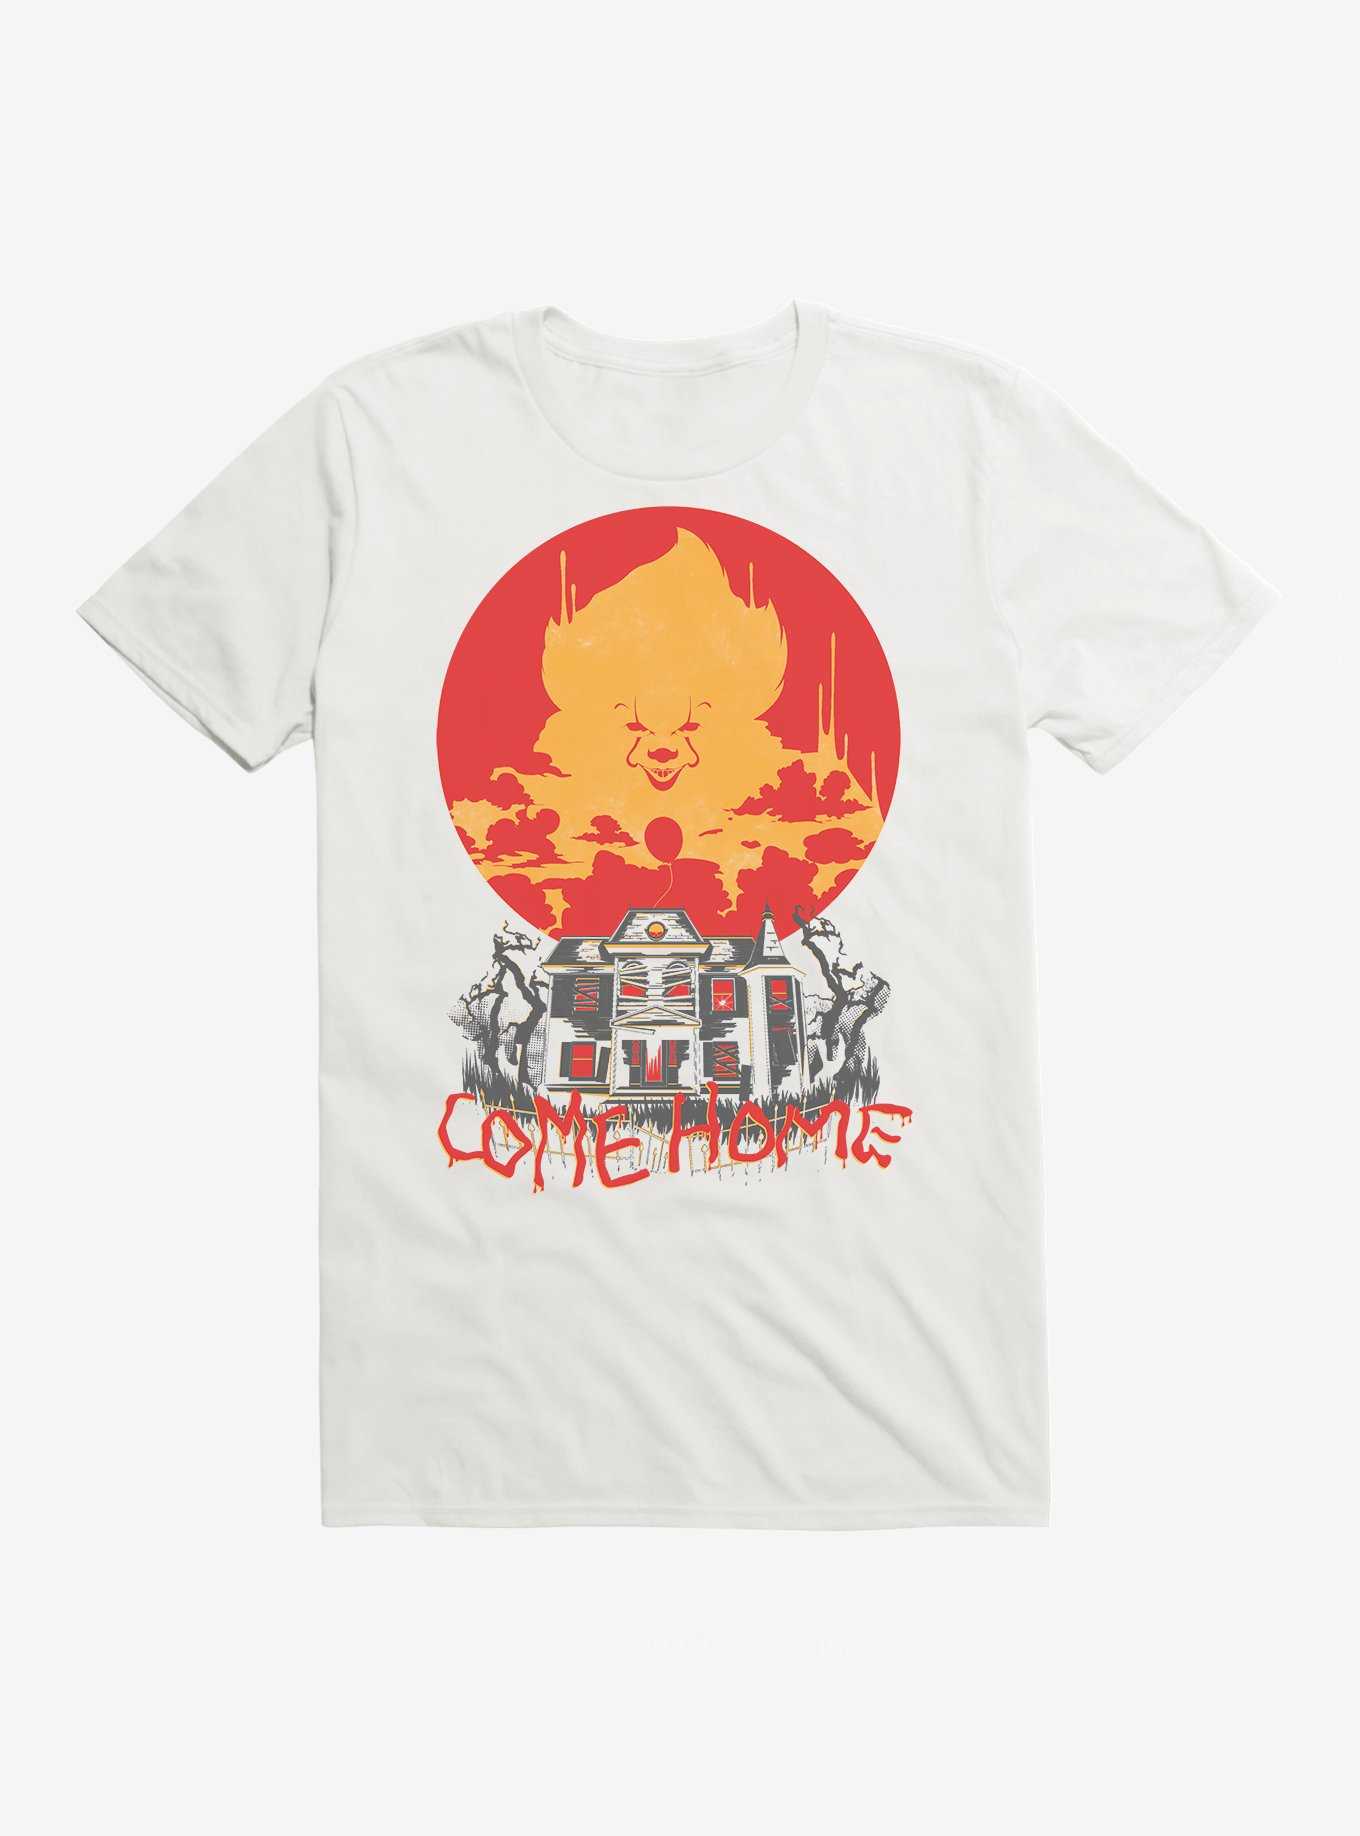 IT Chapter 2 Come Home T-Shirt, , hi-res